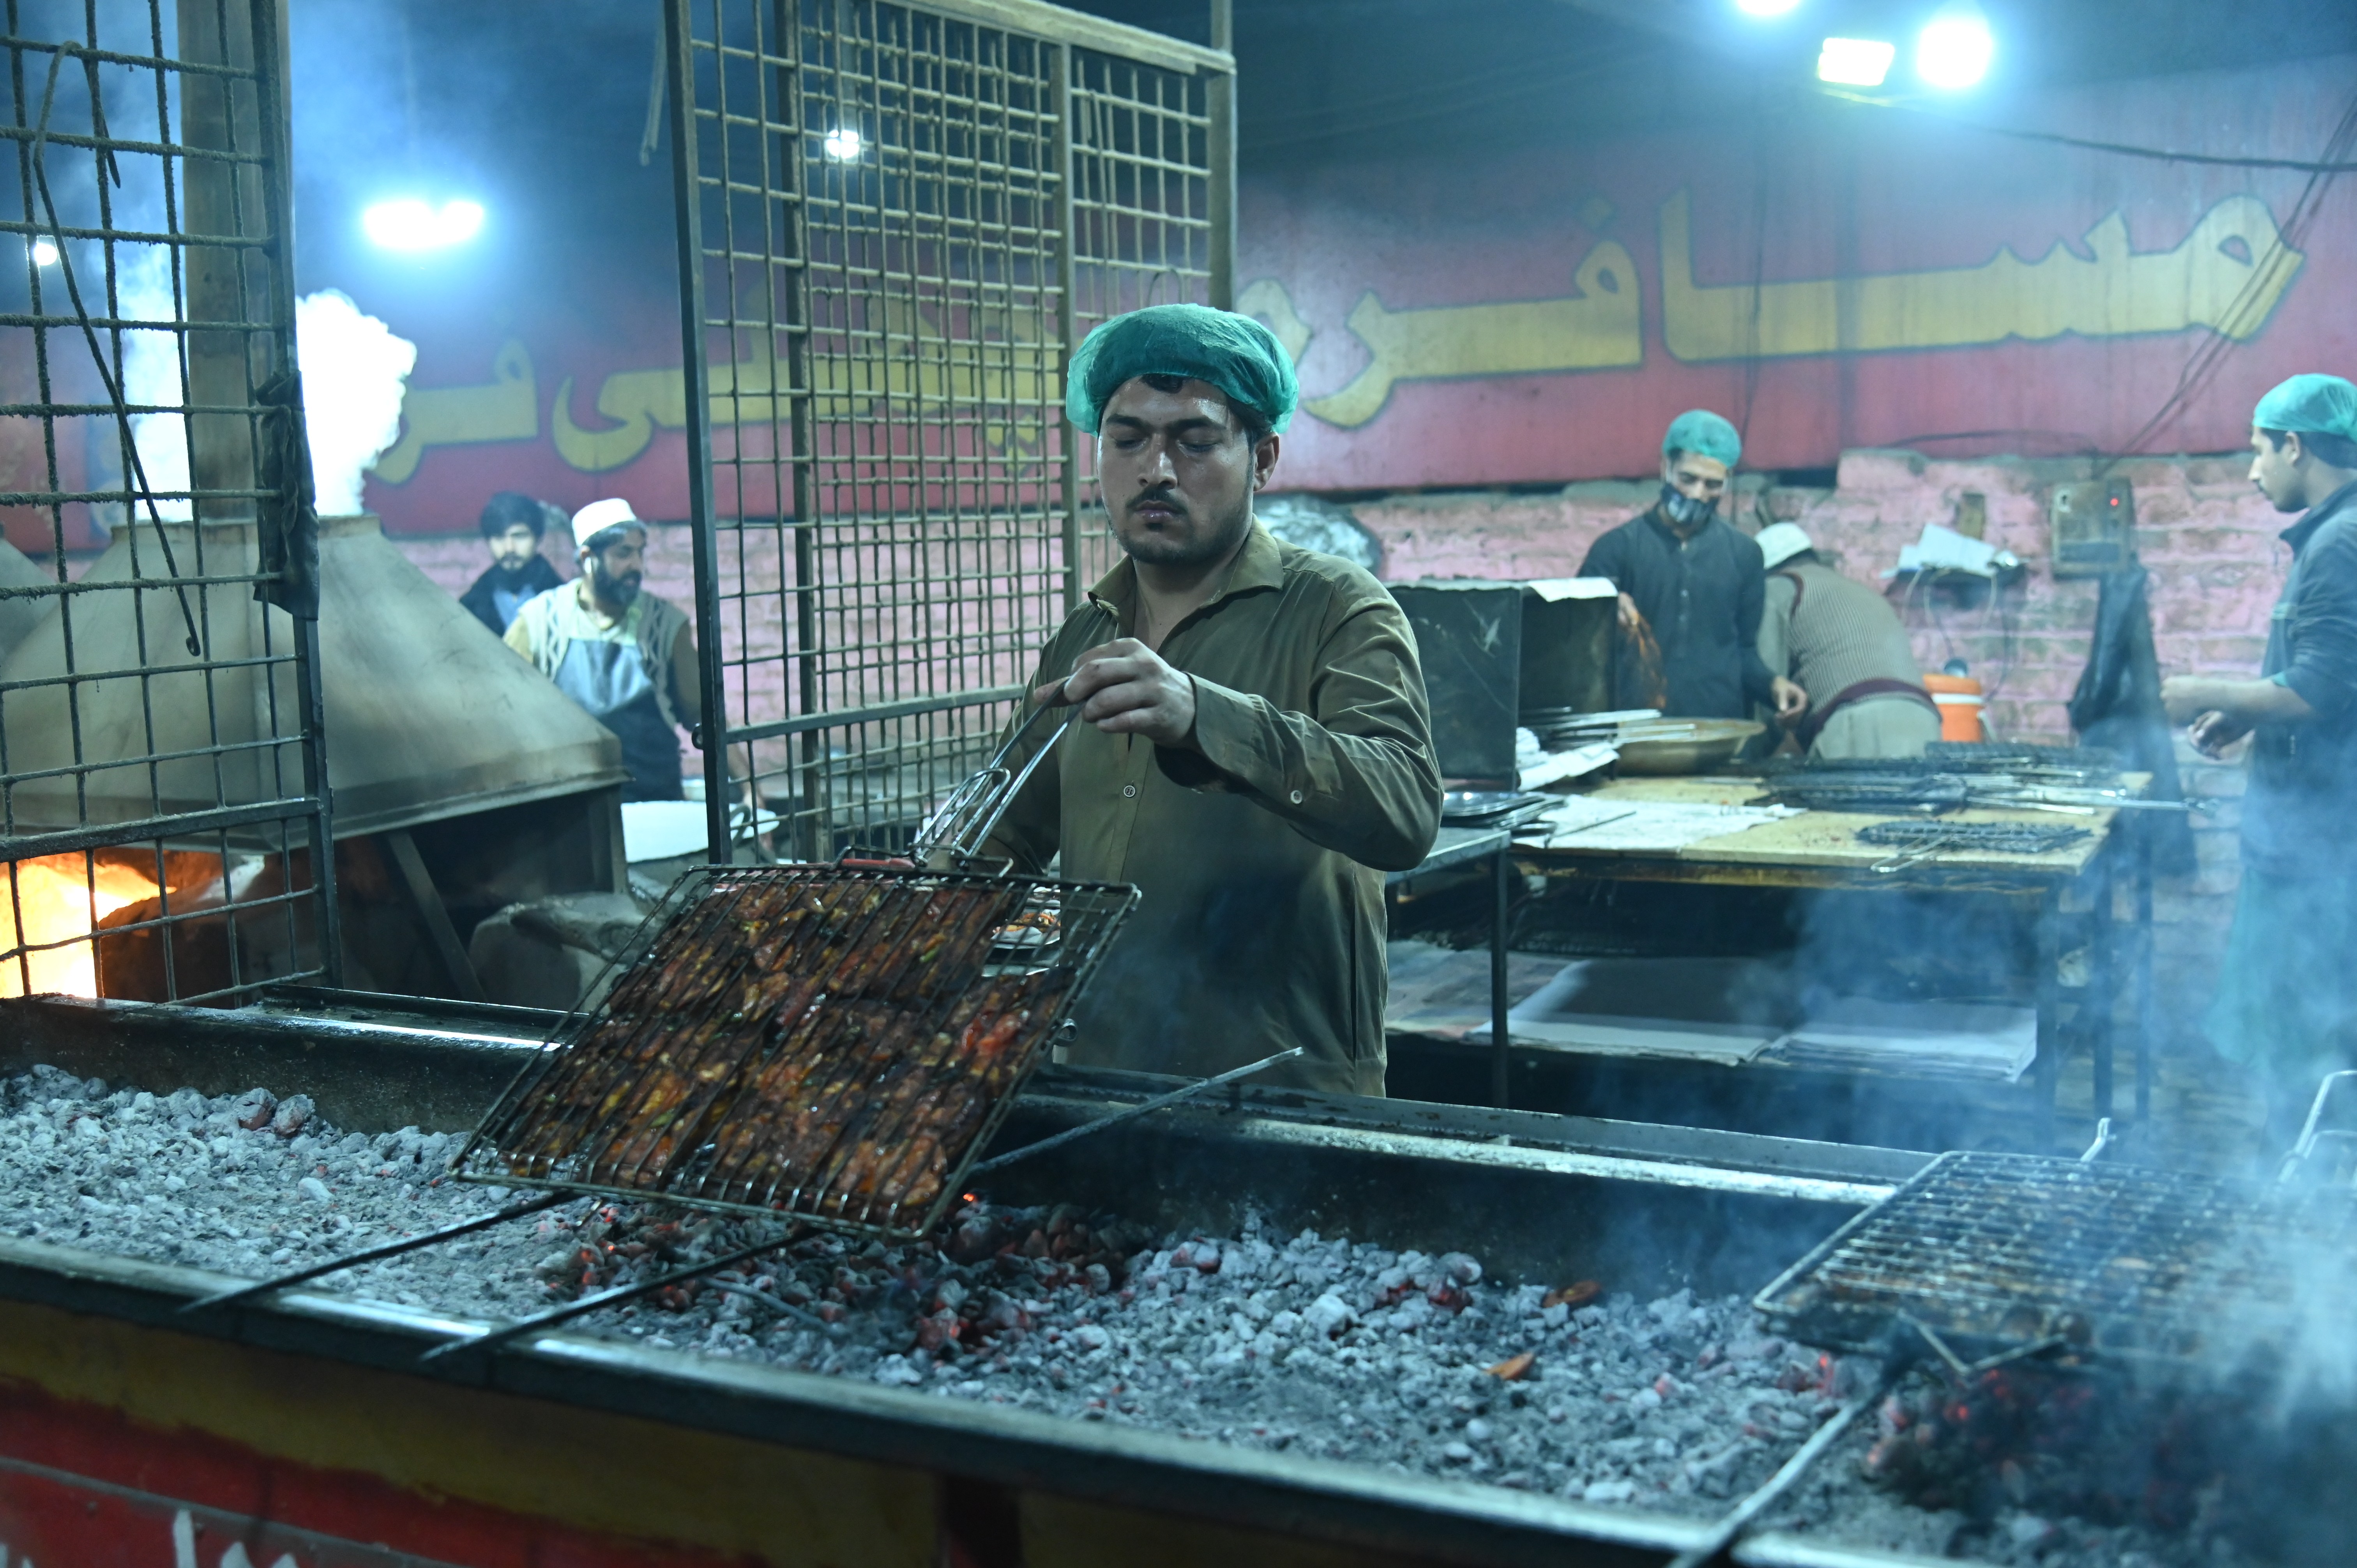 A man making grilled fish over low medium coal flames